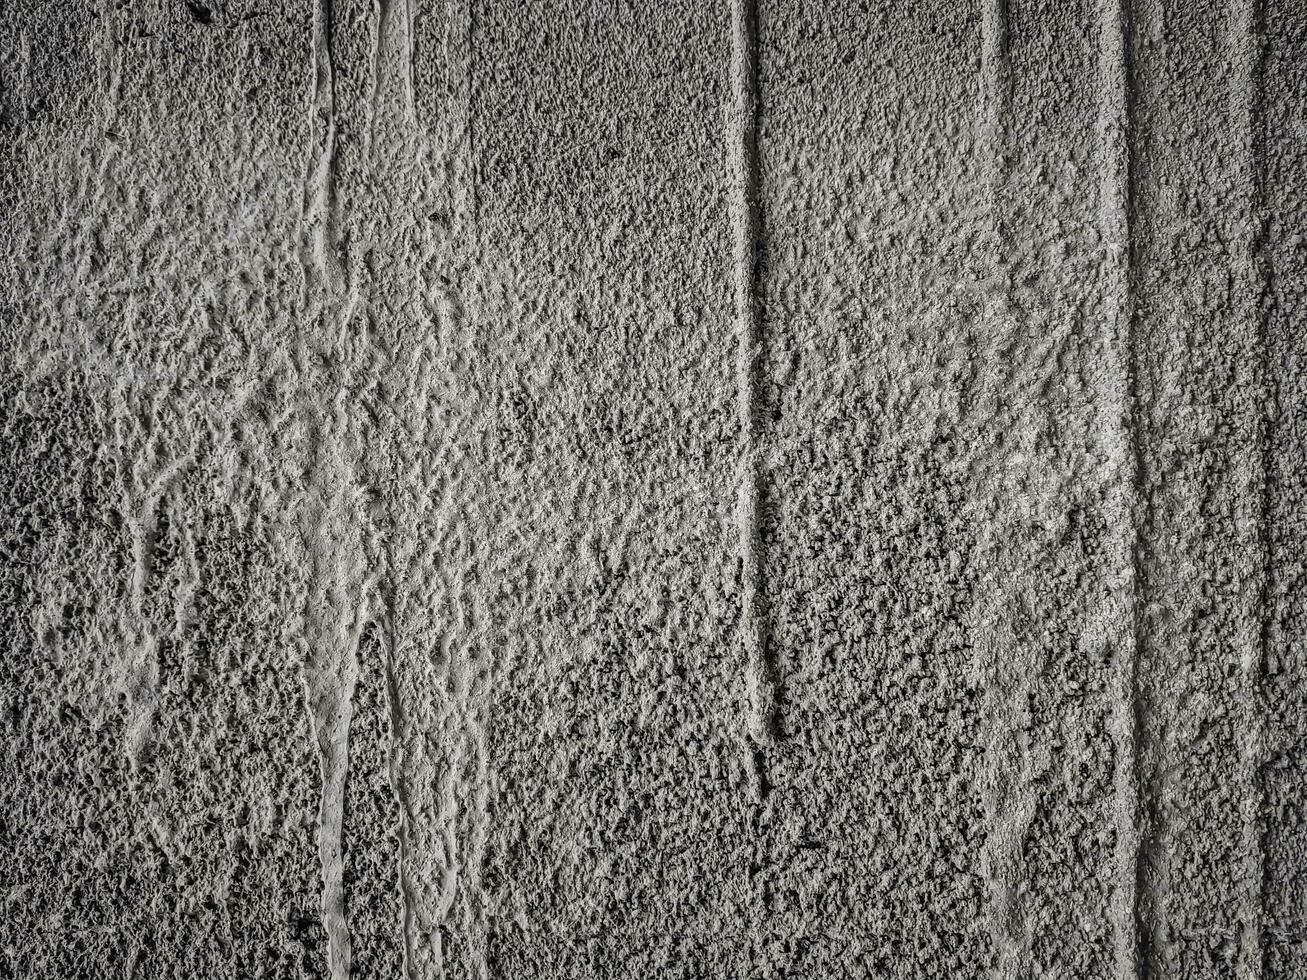 Grainy textured concrete wall for pattern and background photo